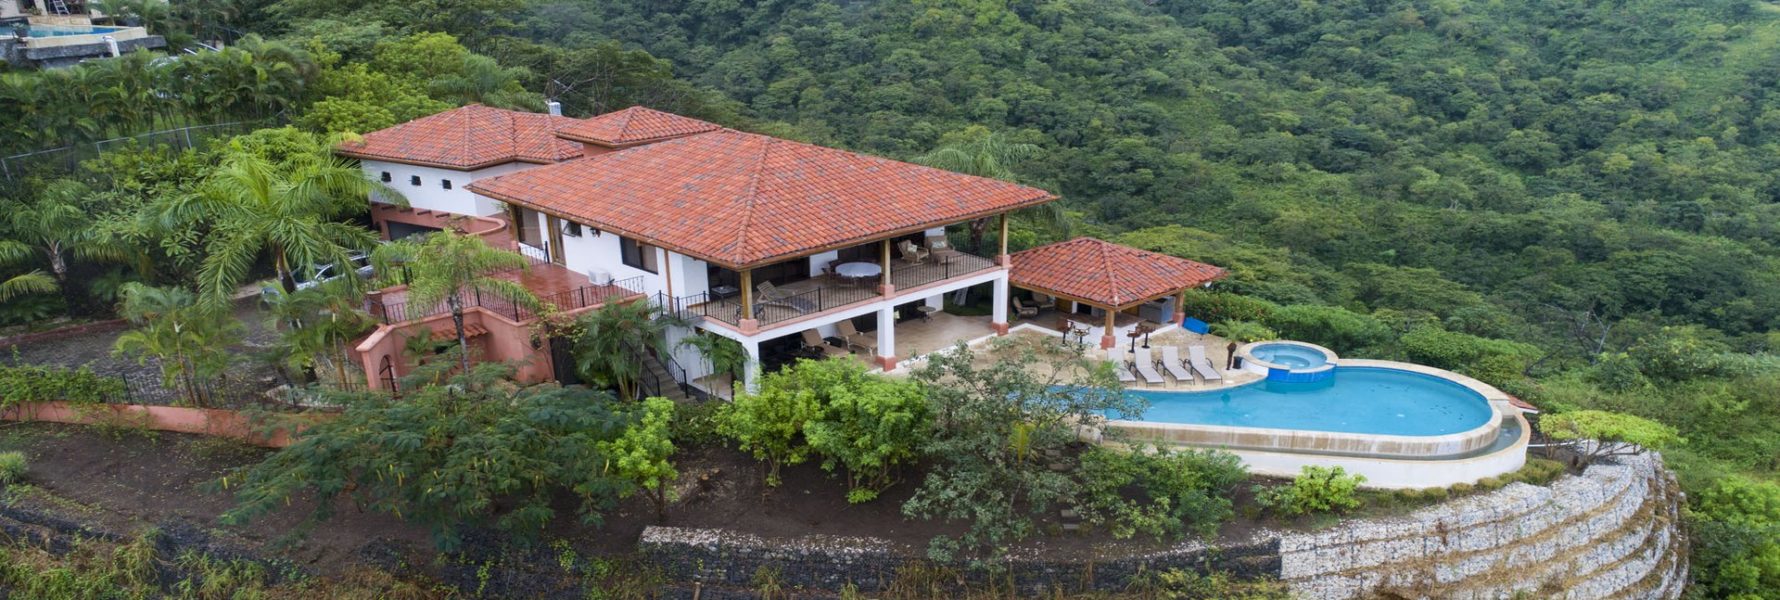 Sitting high on a hill overlooking Potrero Bay, A luxurious vacation rental in Playa Flamingo.